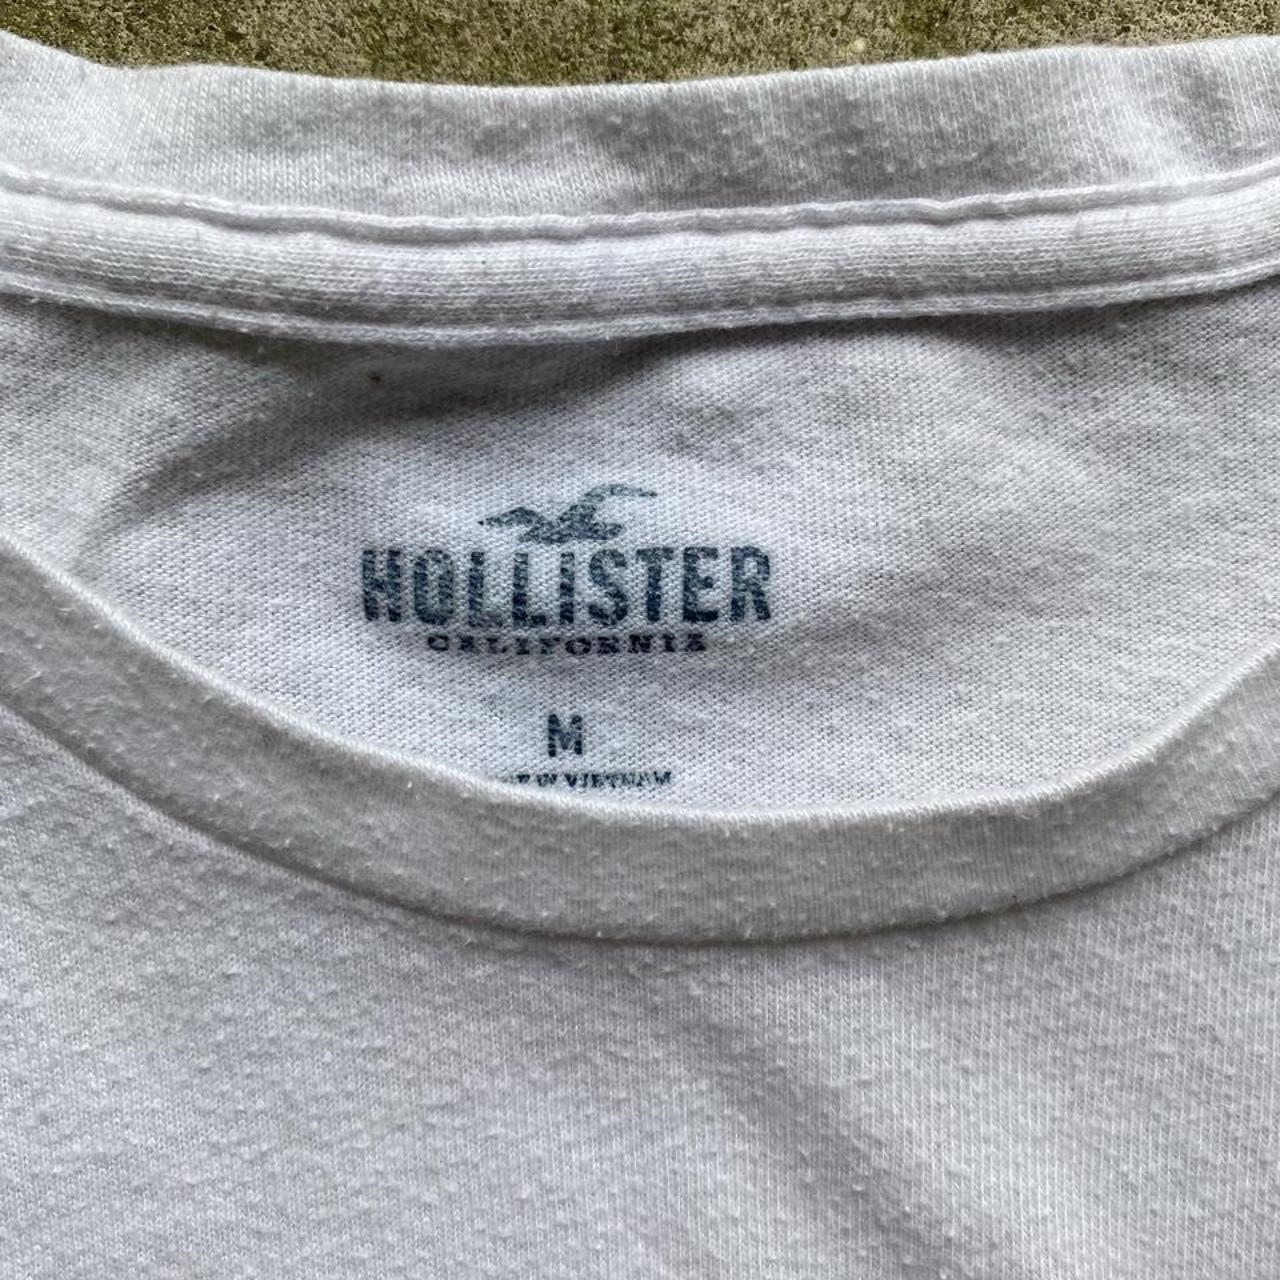 Hollister california t shirt white and blue size small